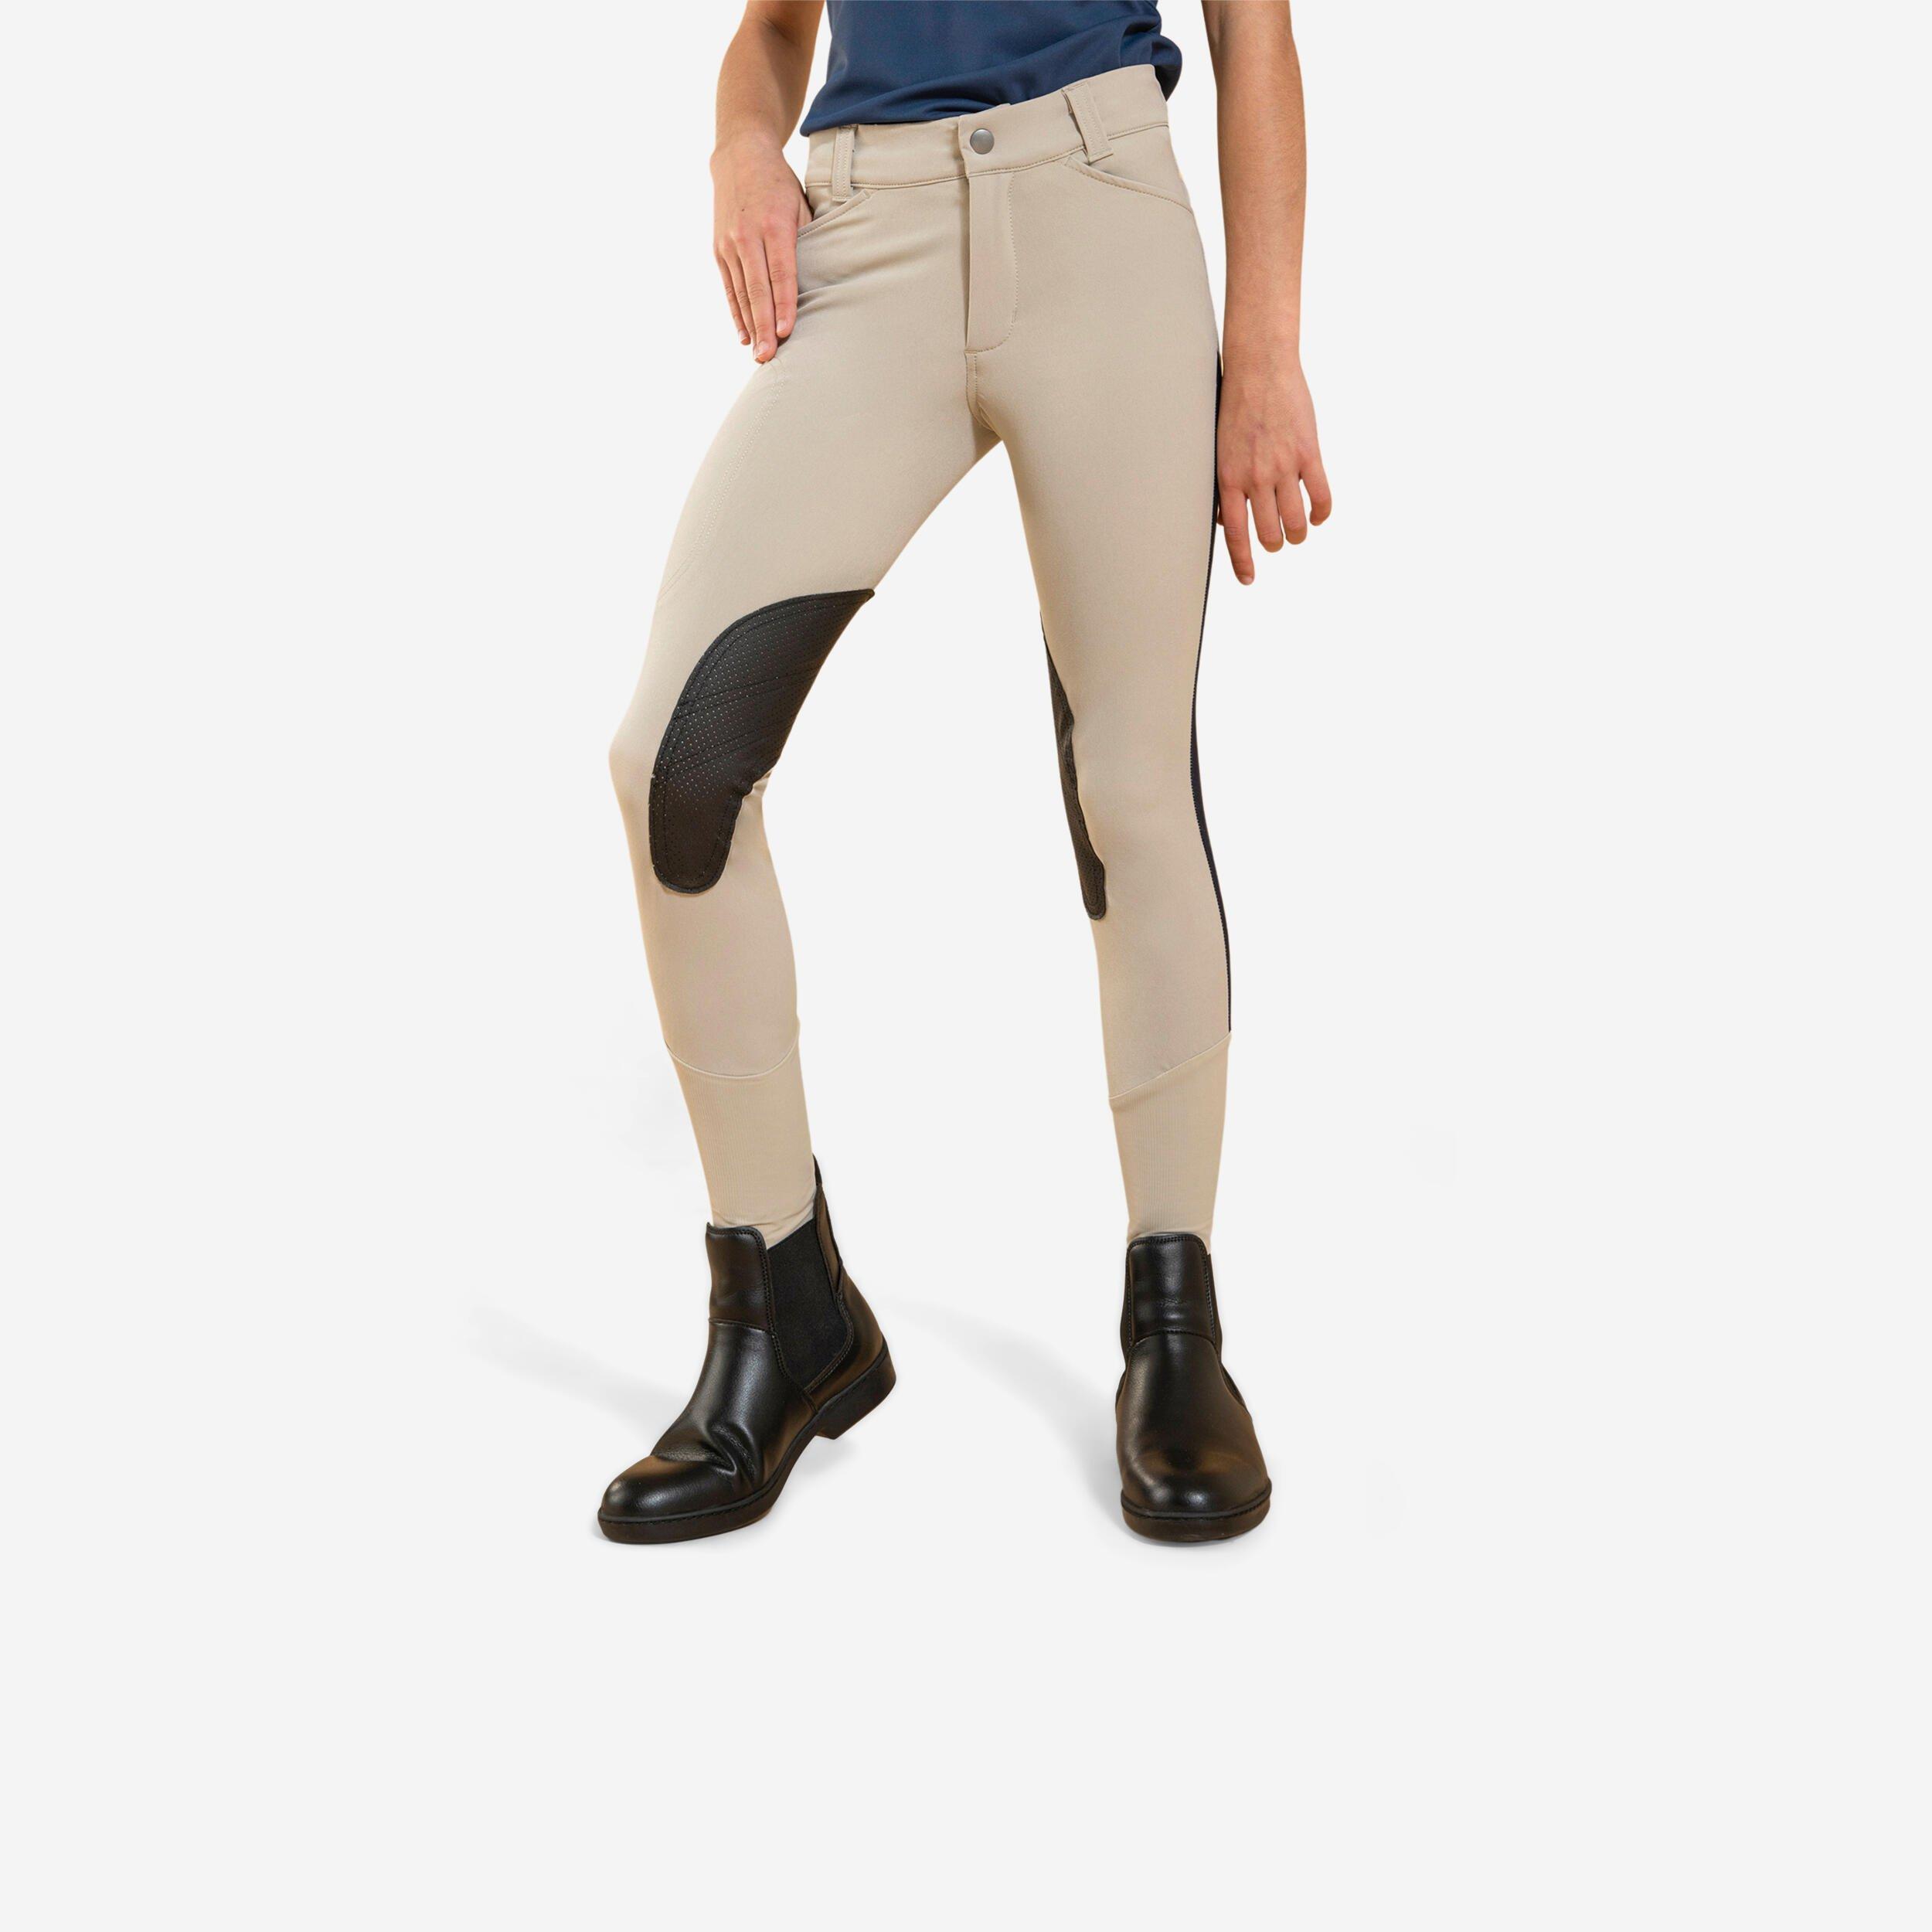 Decathlon Horse Riding Lightweight Mesh Jodhpurs With Grippy Suede Patches 500